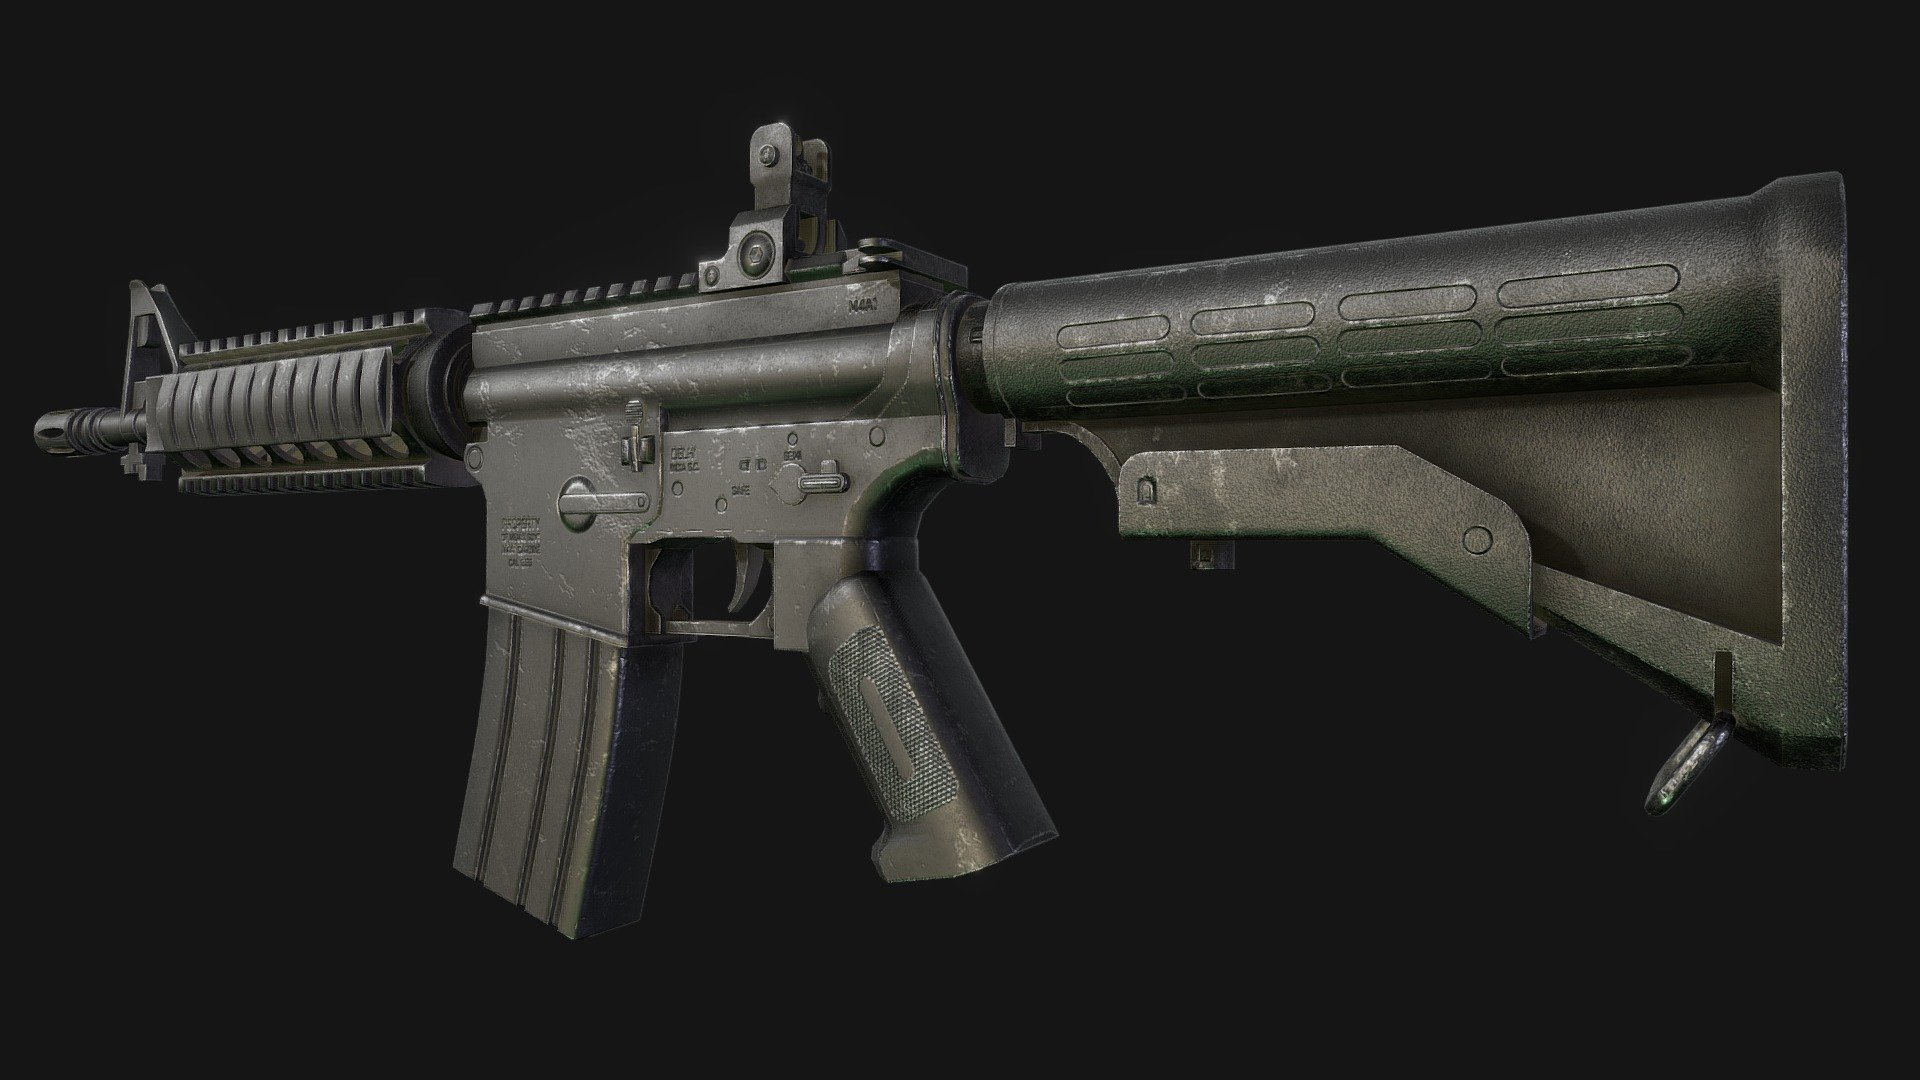 Its a game ready M4A1 model. you are free to use it for your games if you want.
All PBR maps : Base Color , Roughness , Metallic , Height , Normal at 4096x4096 resolution are available.

If you want any custom models made for you or 3D environments for your games we can do that. Contact us @ business.agnistudios@gmail.com

My Artstation : https://www.artstation.com/avishkartheartist - M4A1 - 3D model by AgniStudios 3d model